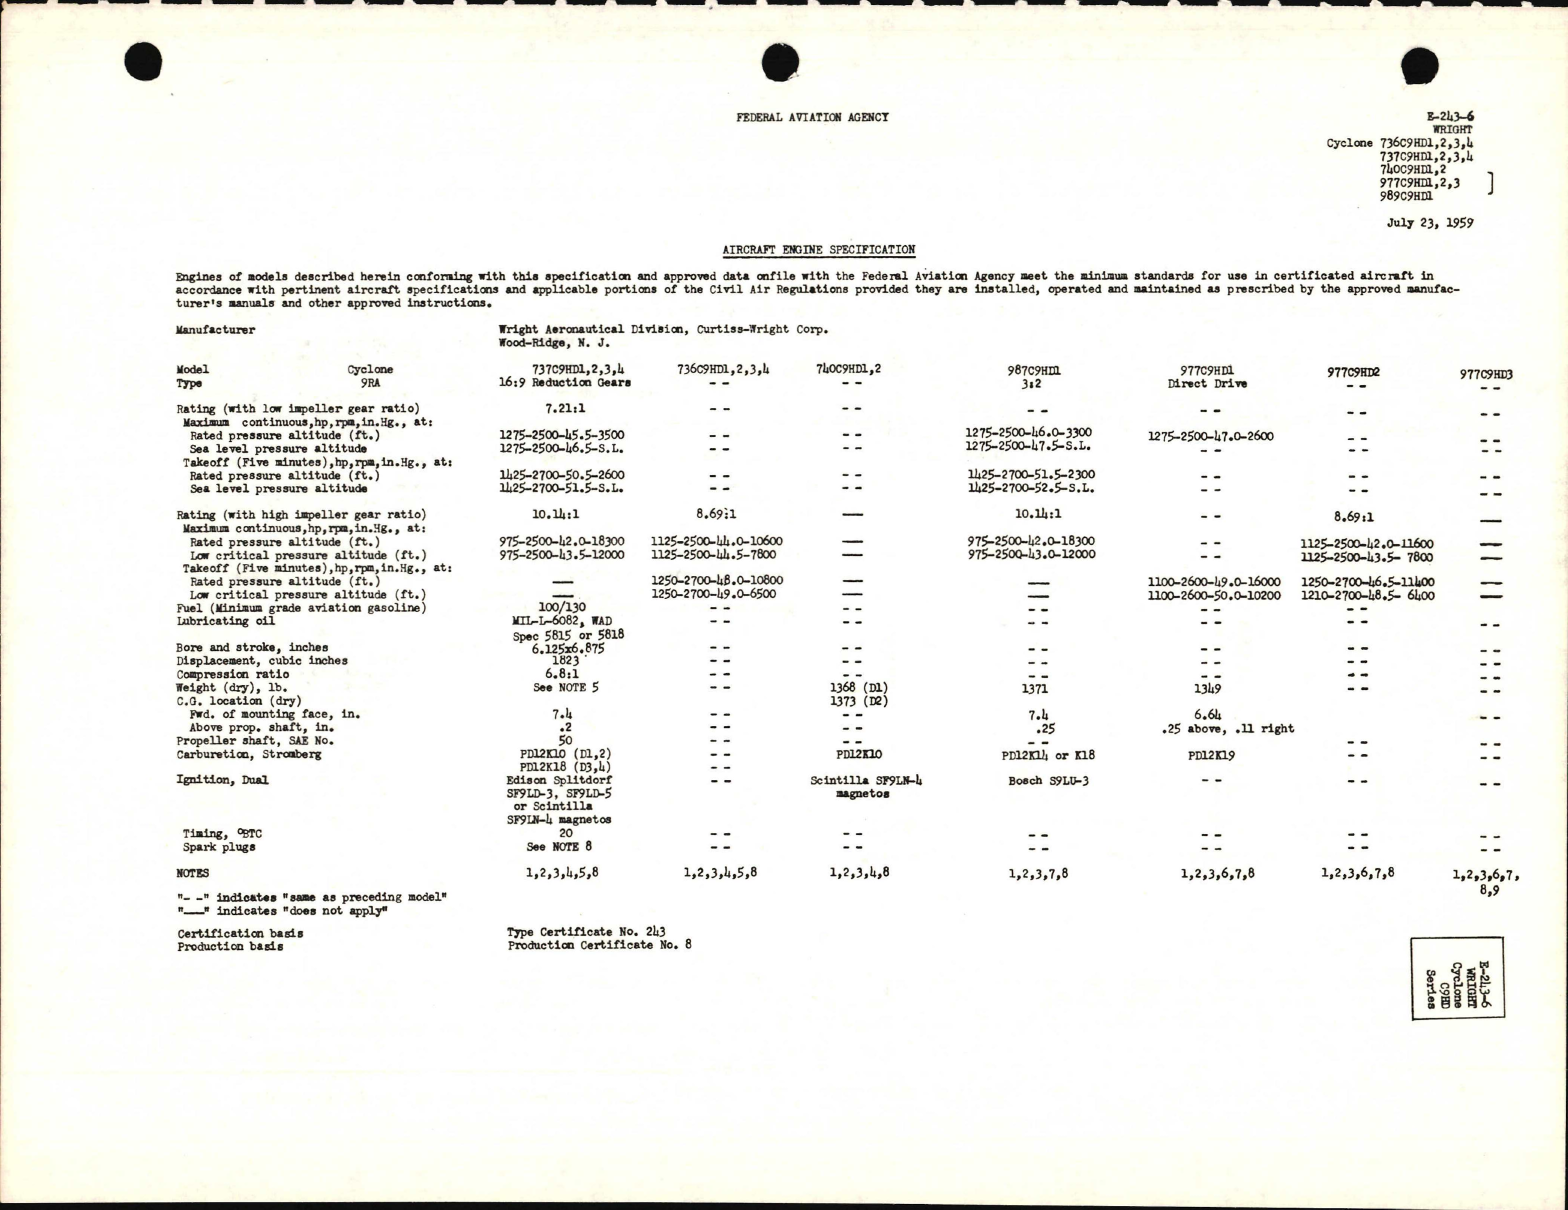 Sample page 1 from AirCorps Library document: 736C9HD, 737C9HD, 740C9HD, 977C9HD, 989C9HD1 Cyclone